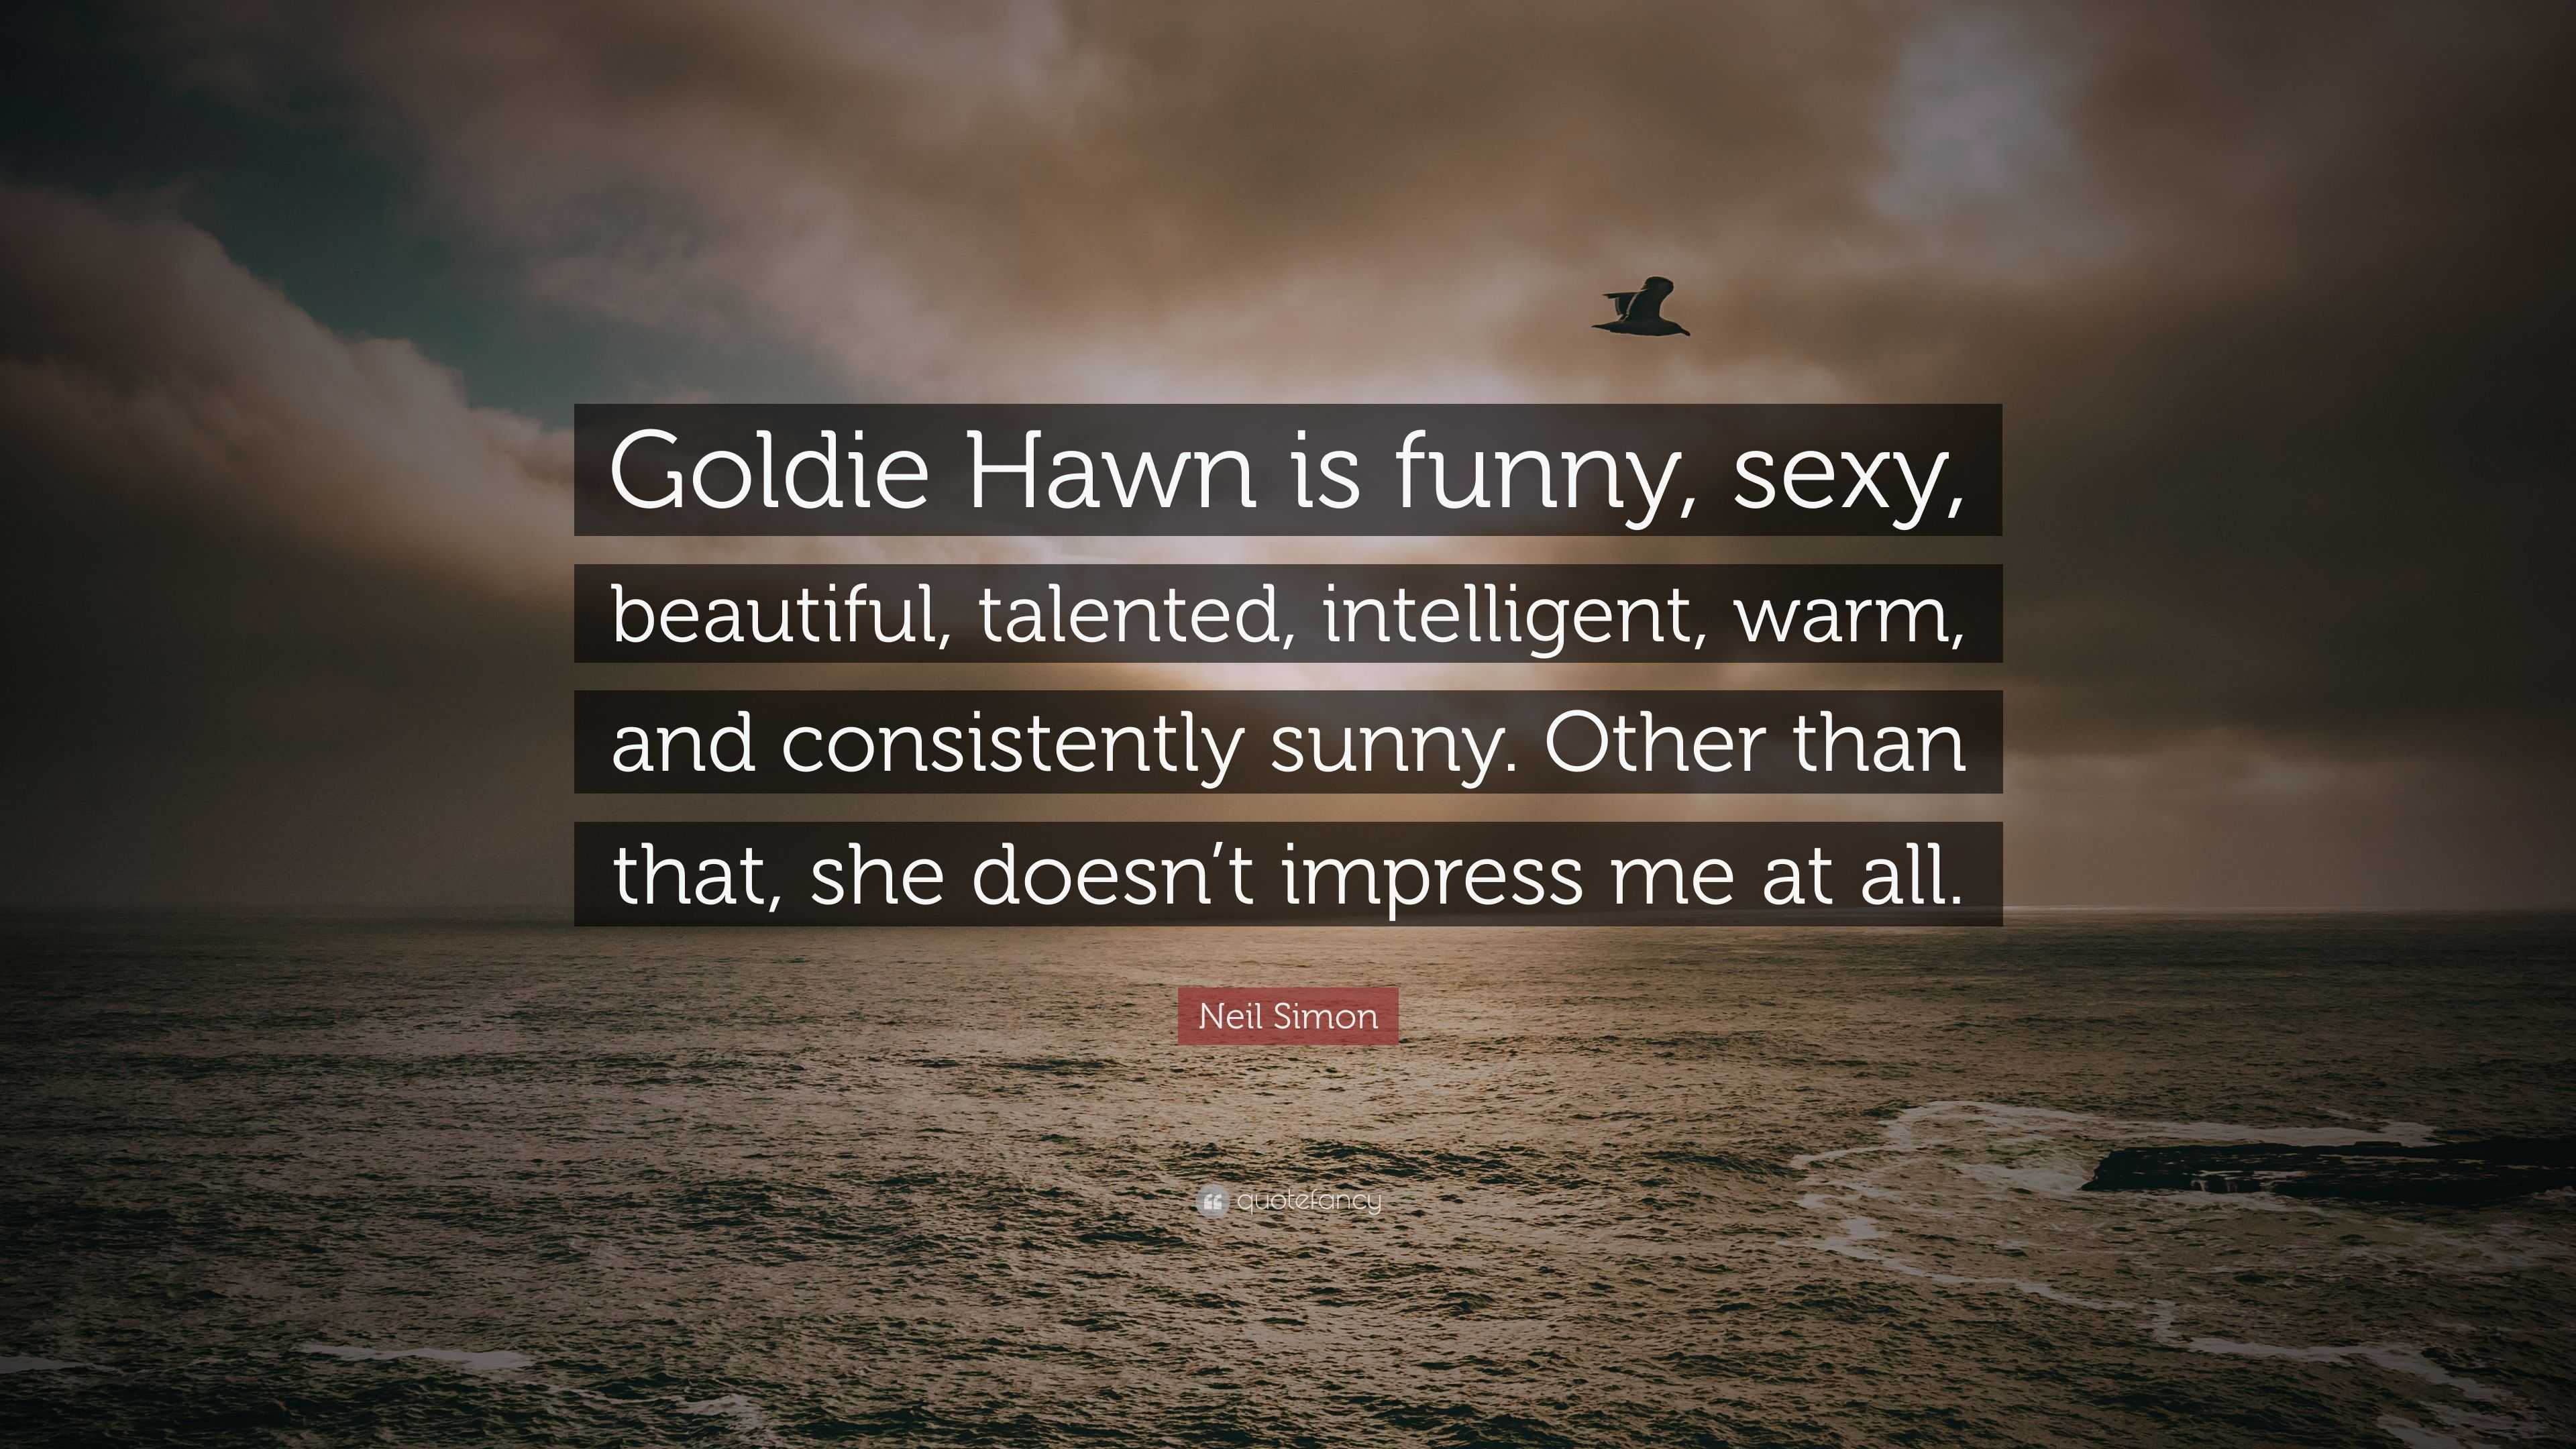 Neil Simon Quote: “Goldie Hawn is funny, sexy, beautiful, talented,  intelligent, warm, and consistently sunny. Other than that, she doesn't...”